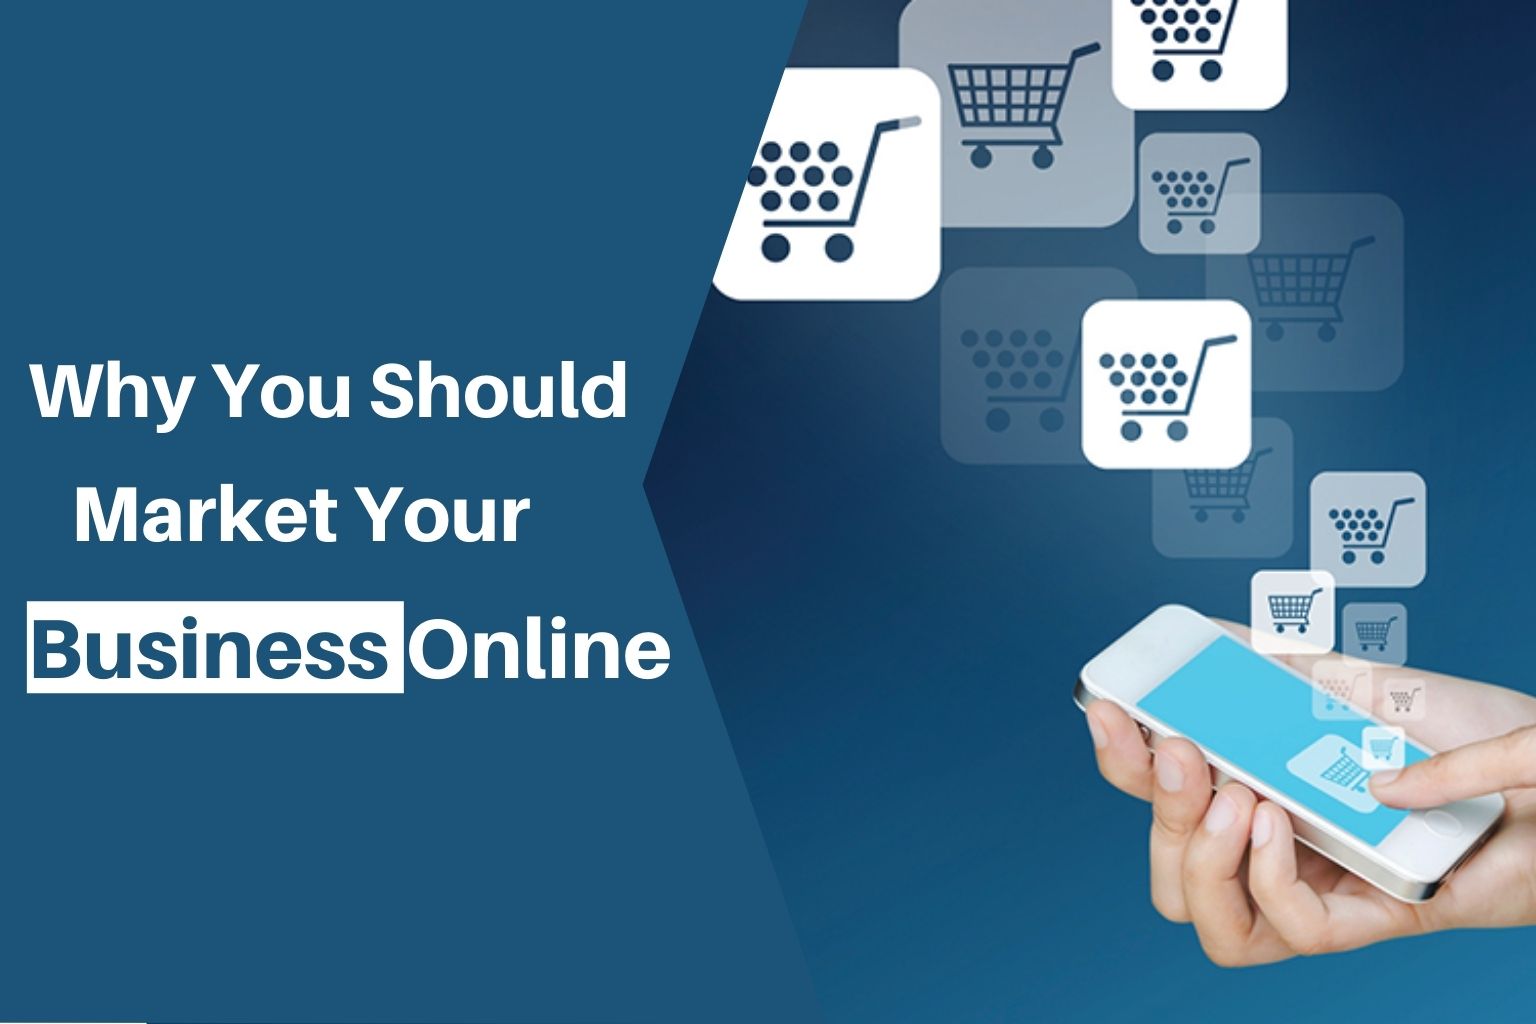 Why You Should Market Your Business Online